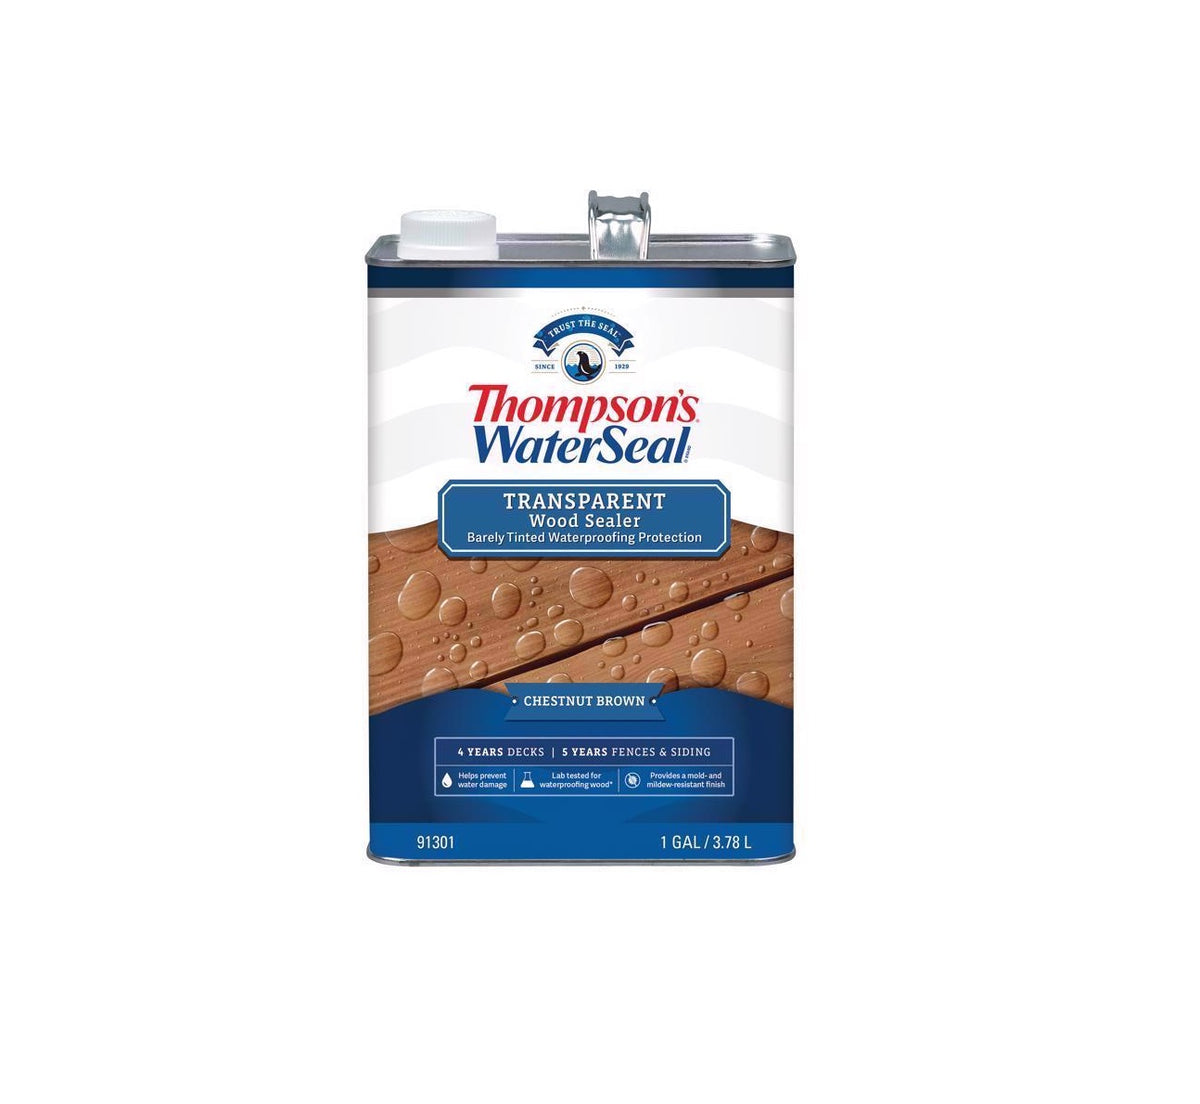 Thompson's WaterSeal TH.091301-16 Waterproofing Wood Stain and Sealer, 1 Gallon